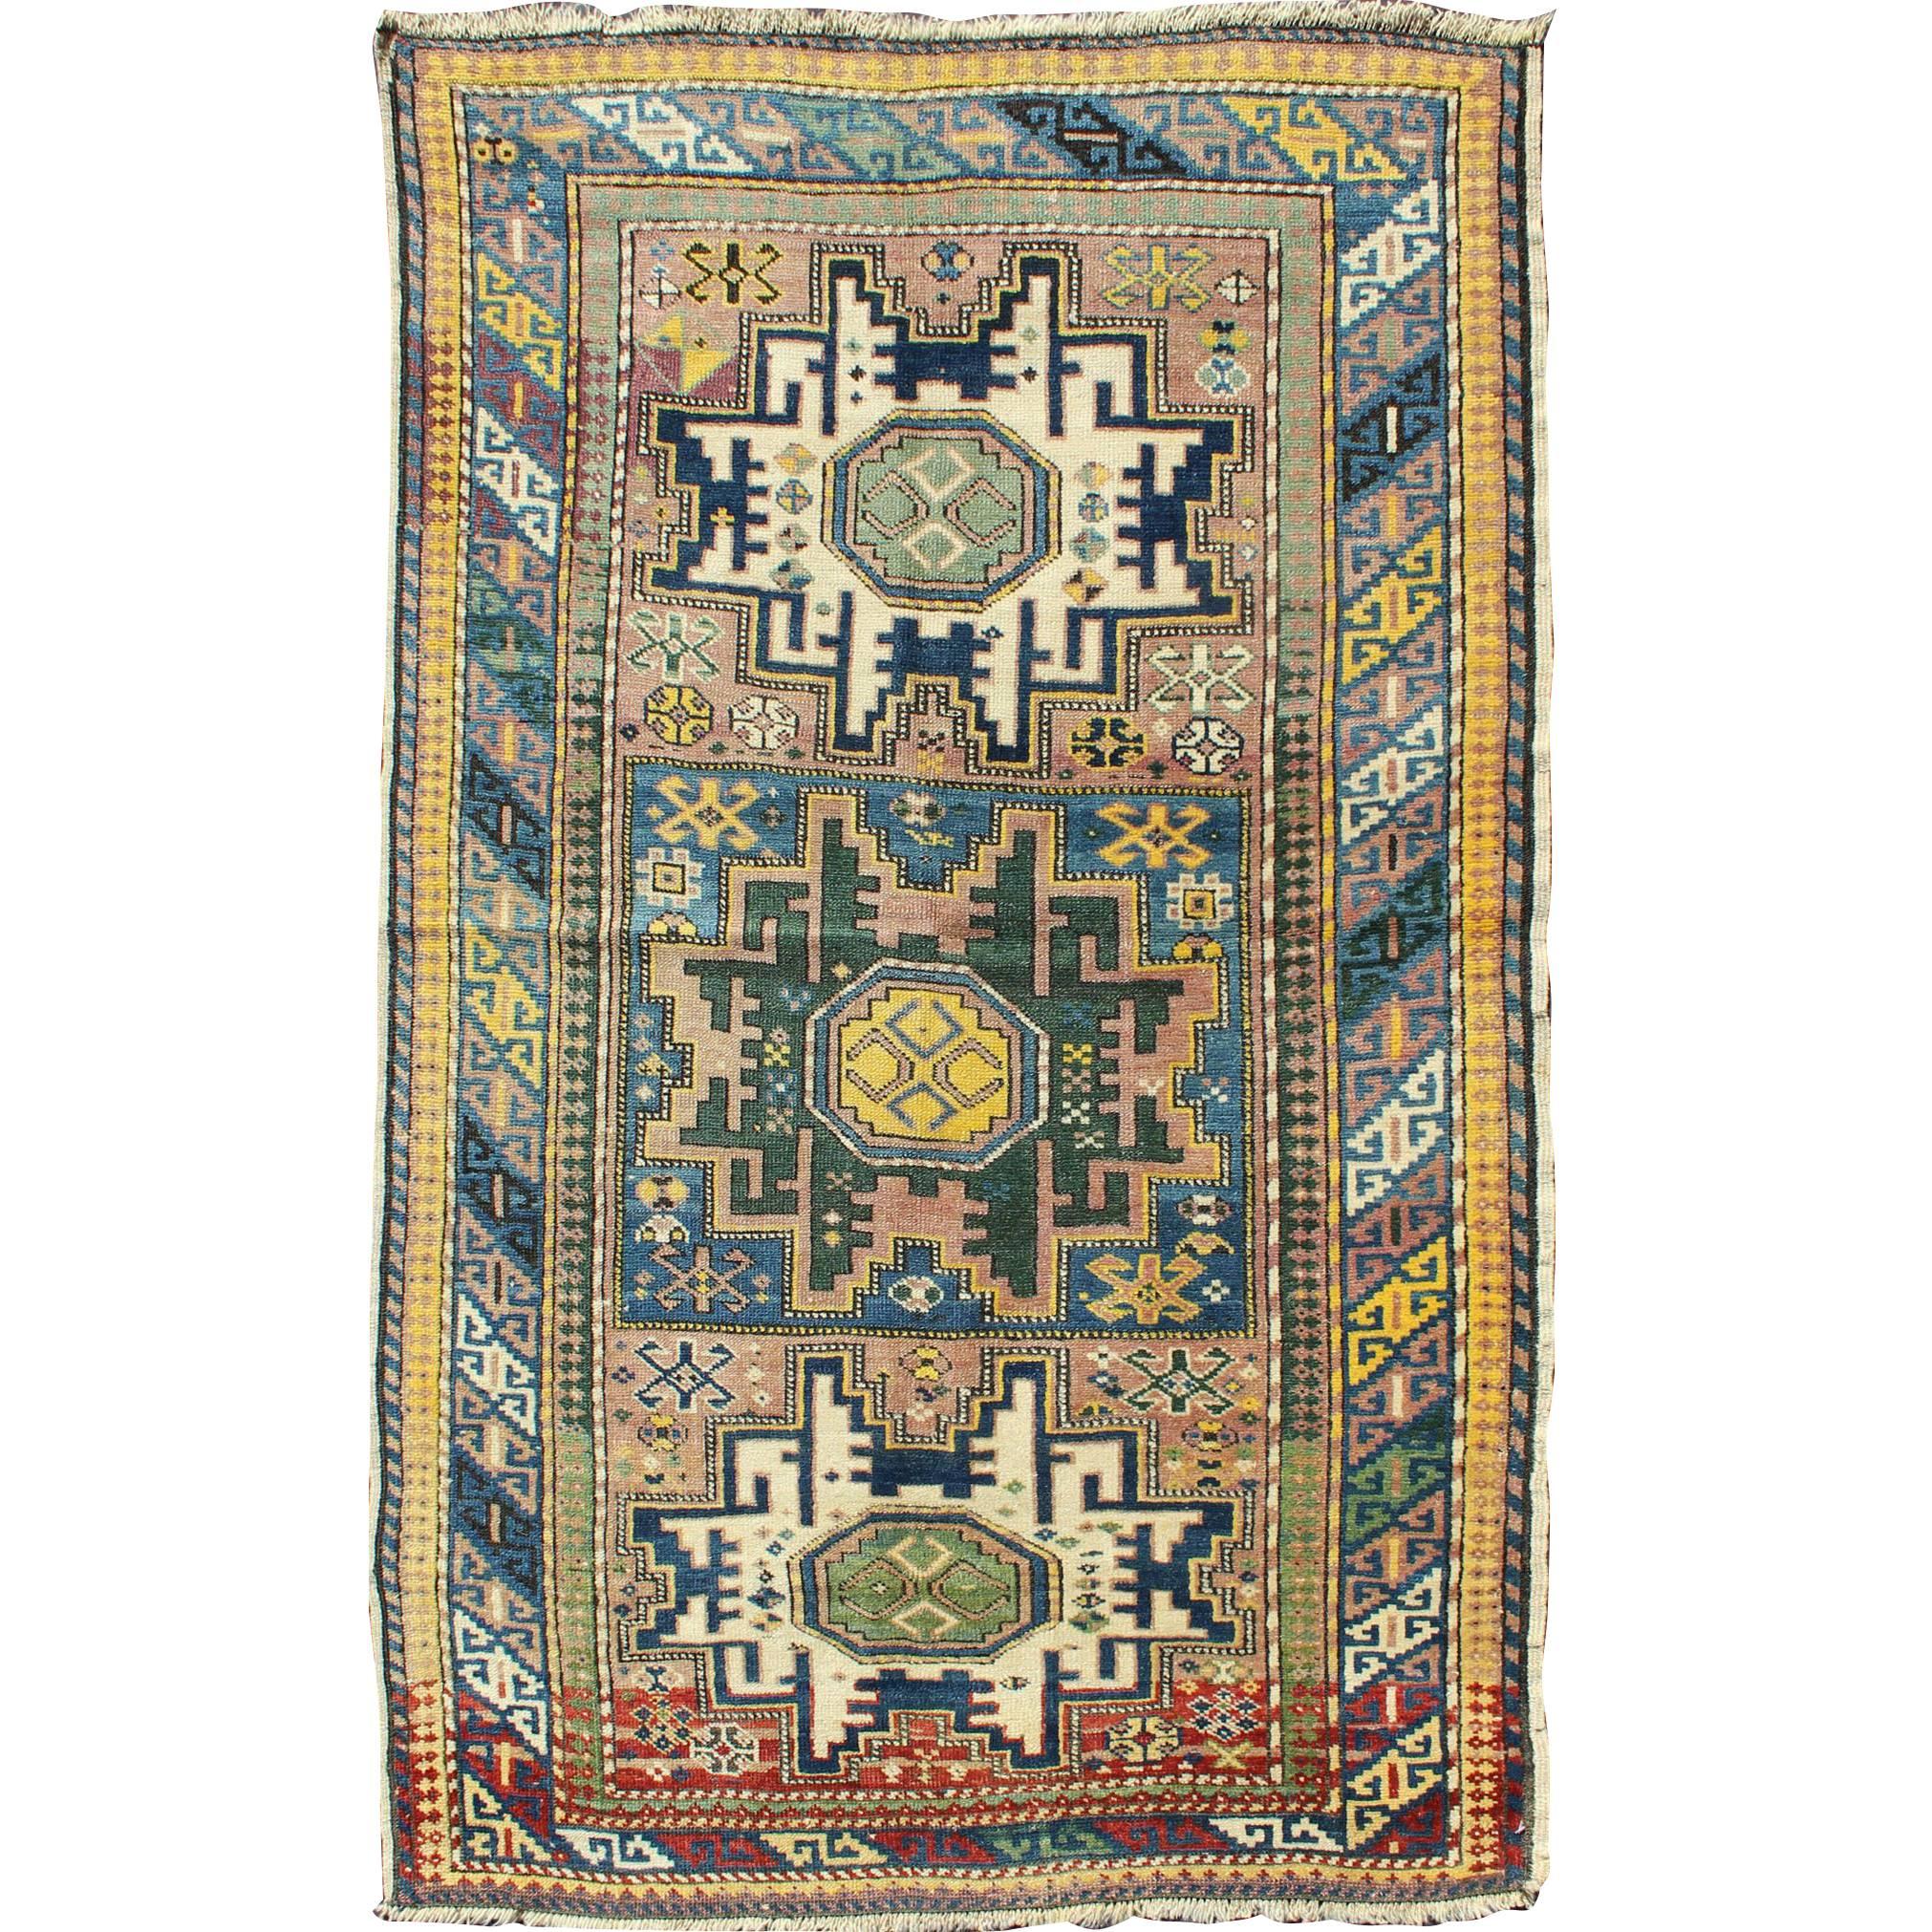 Antique Colorful Kuba Caucasian Rug with Star Medallions in Green, Blue, Yellow